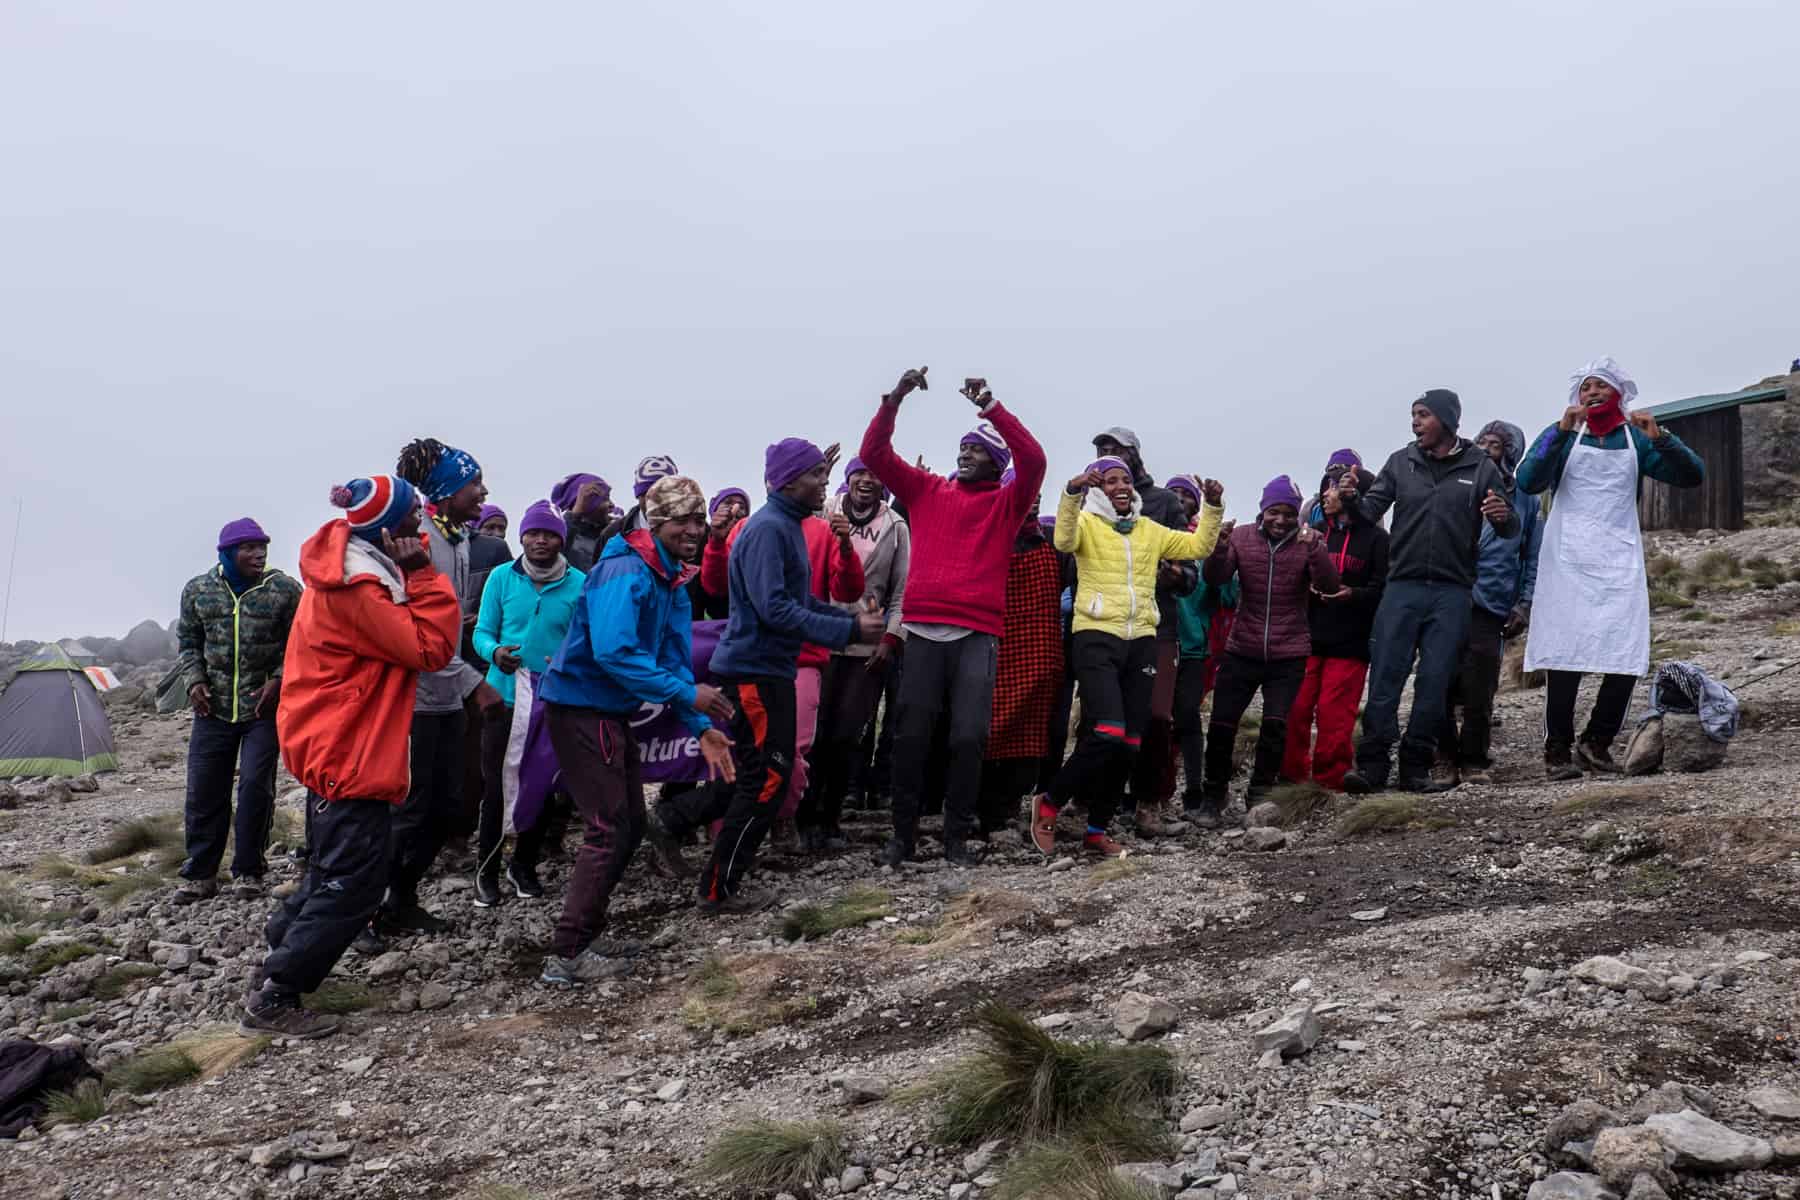 A group of 30 Kilimanjaro porters and guides sing and dance on a mountain slope covered in mist.